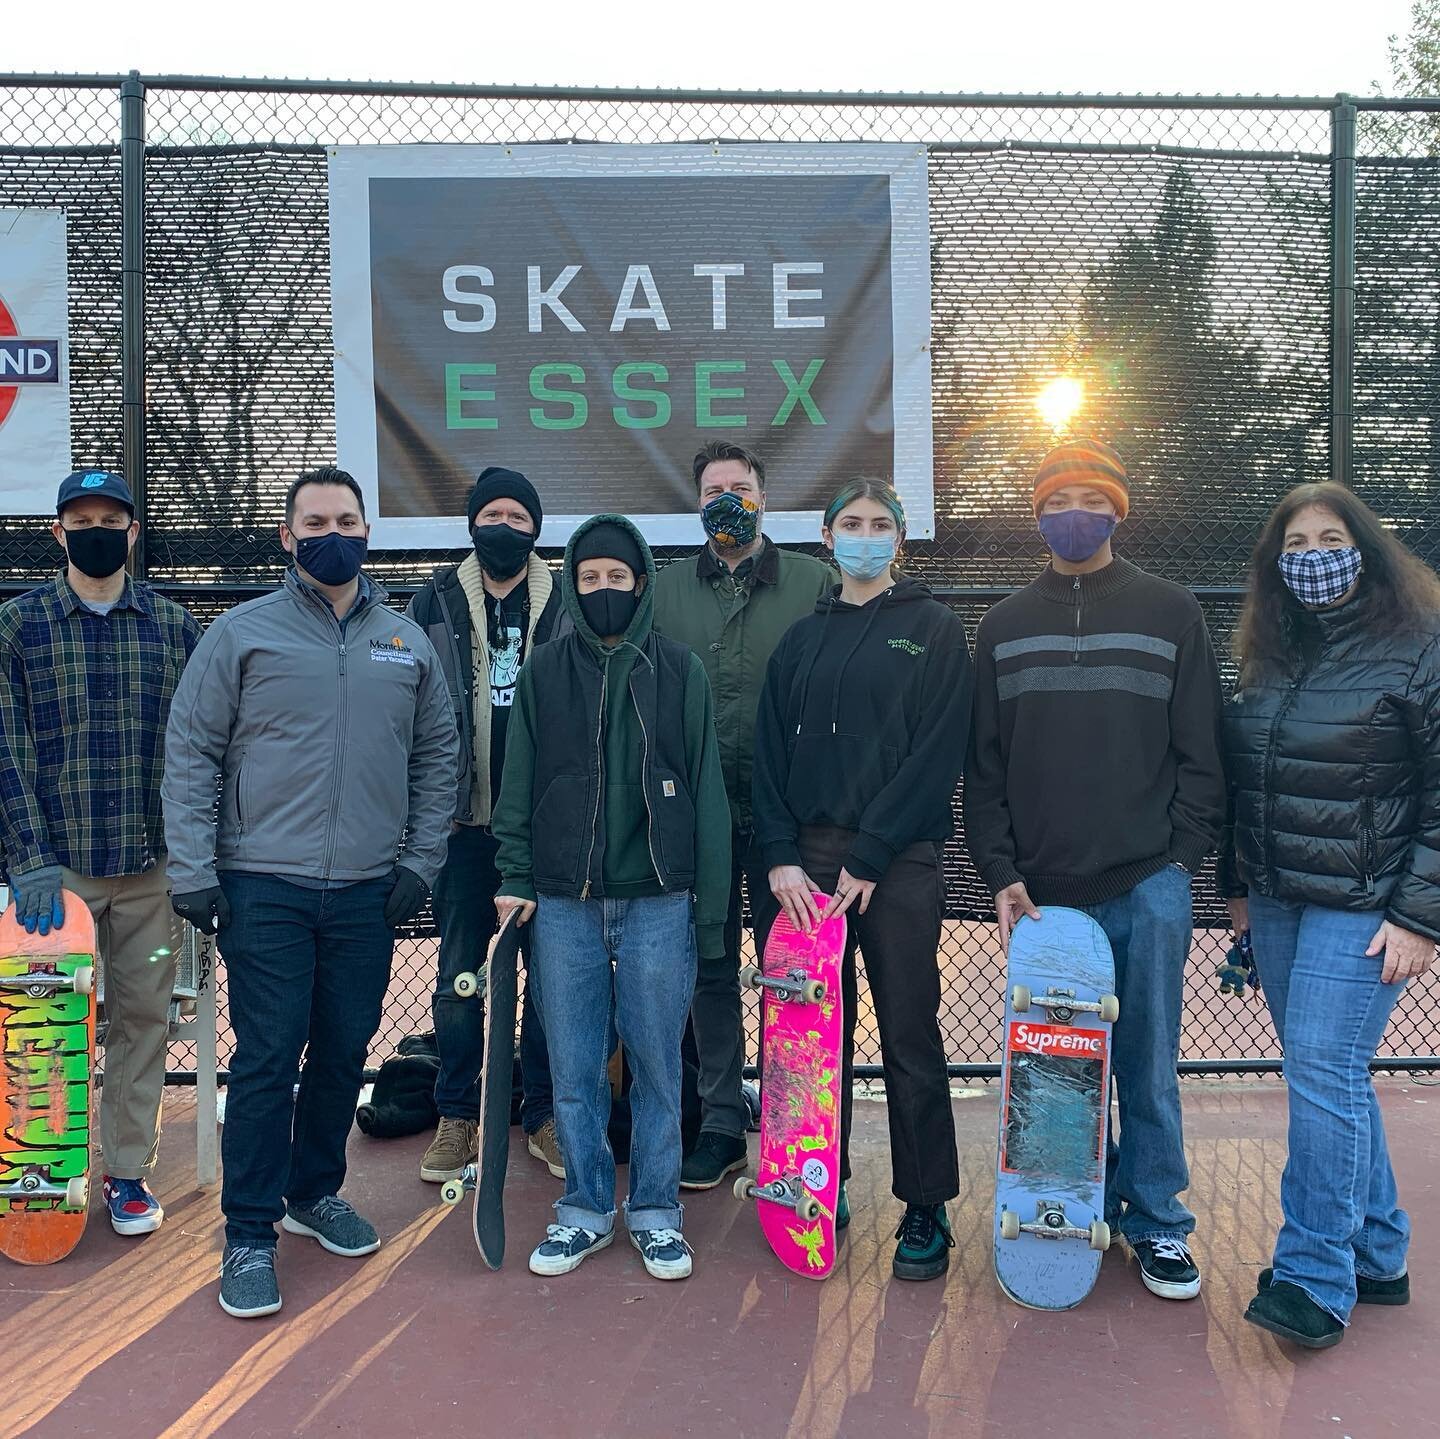 Today Alexis Sablone visited @courtskatepark to see what a well loved skate spot it is.  We are excited to partner with Alexis for a &ldquo;skateable sculpture&rdquo; for Montclair.  For more information about Alexis&rsquo;s designs and her pro skate